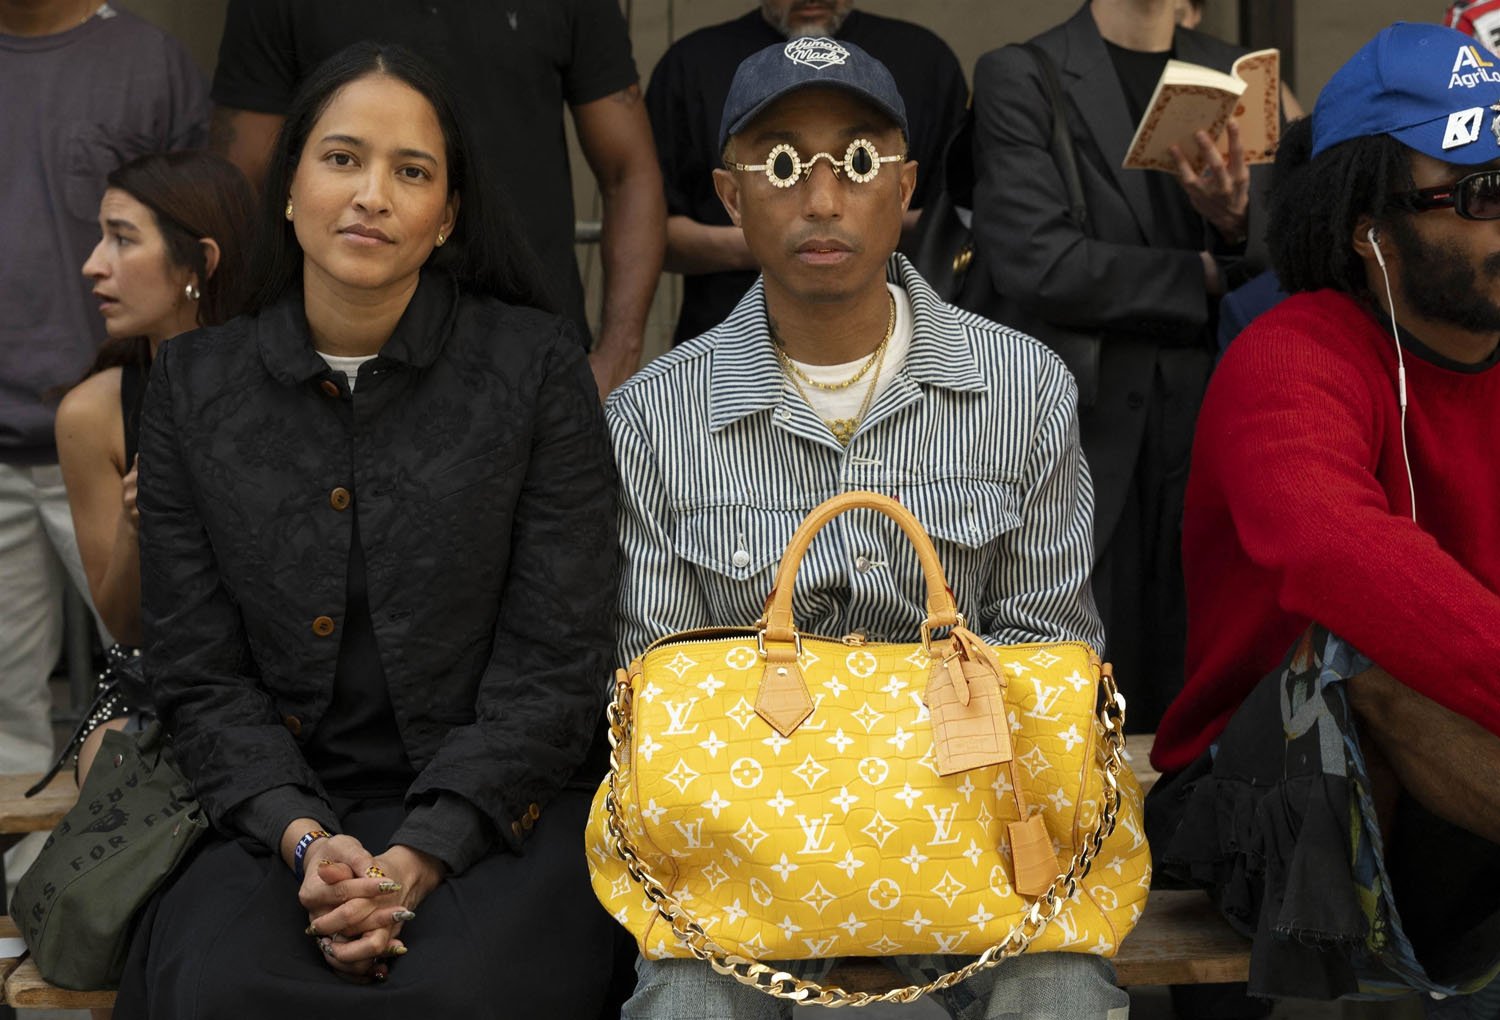 At his Louis Vuitton show, Pharrell debuted another pair of mad Tiffany and  Co sunglasses